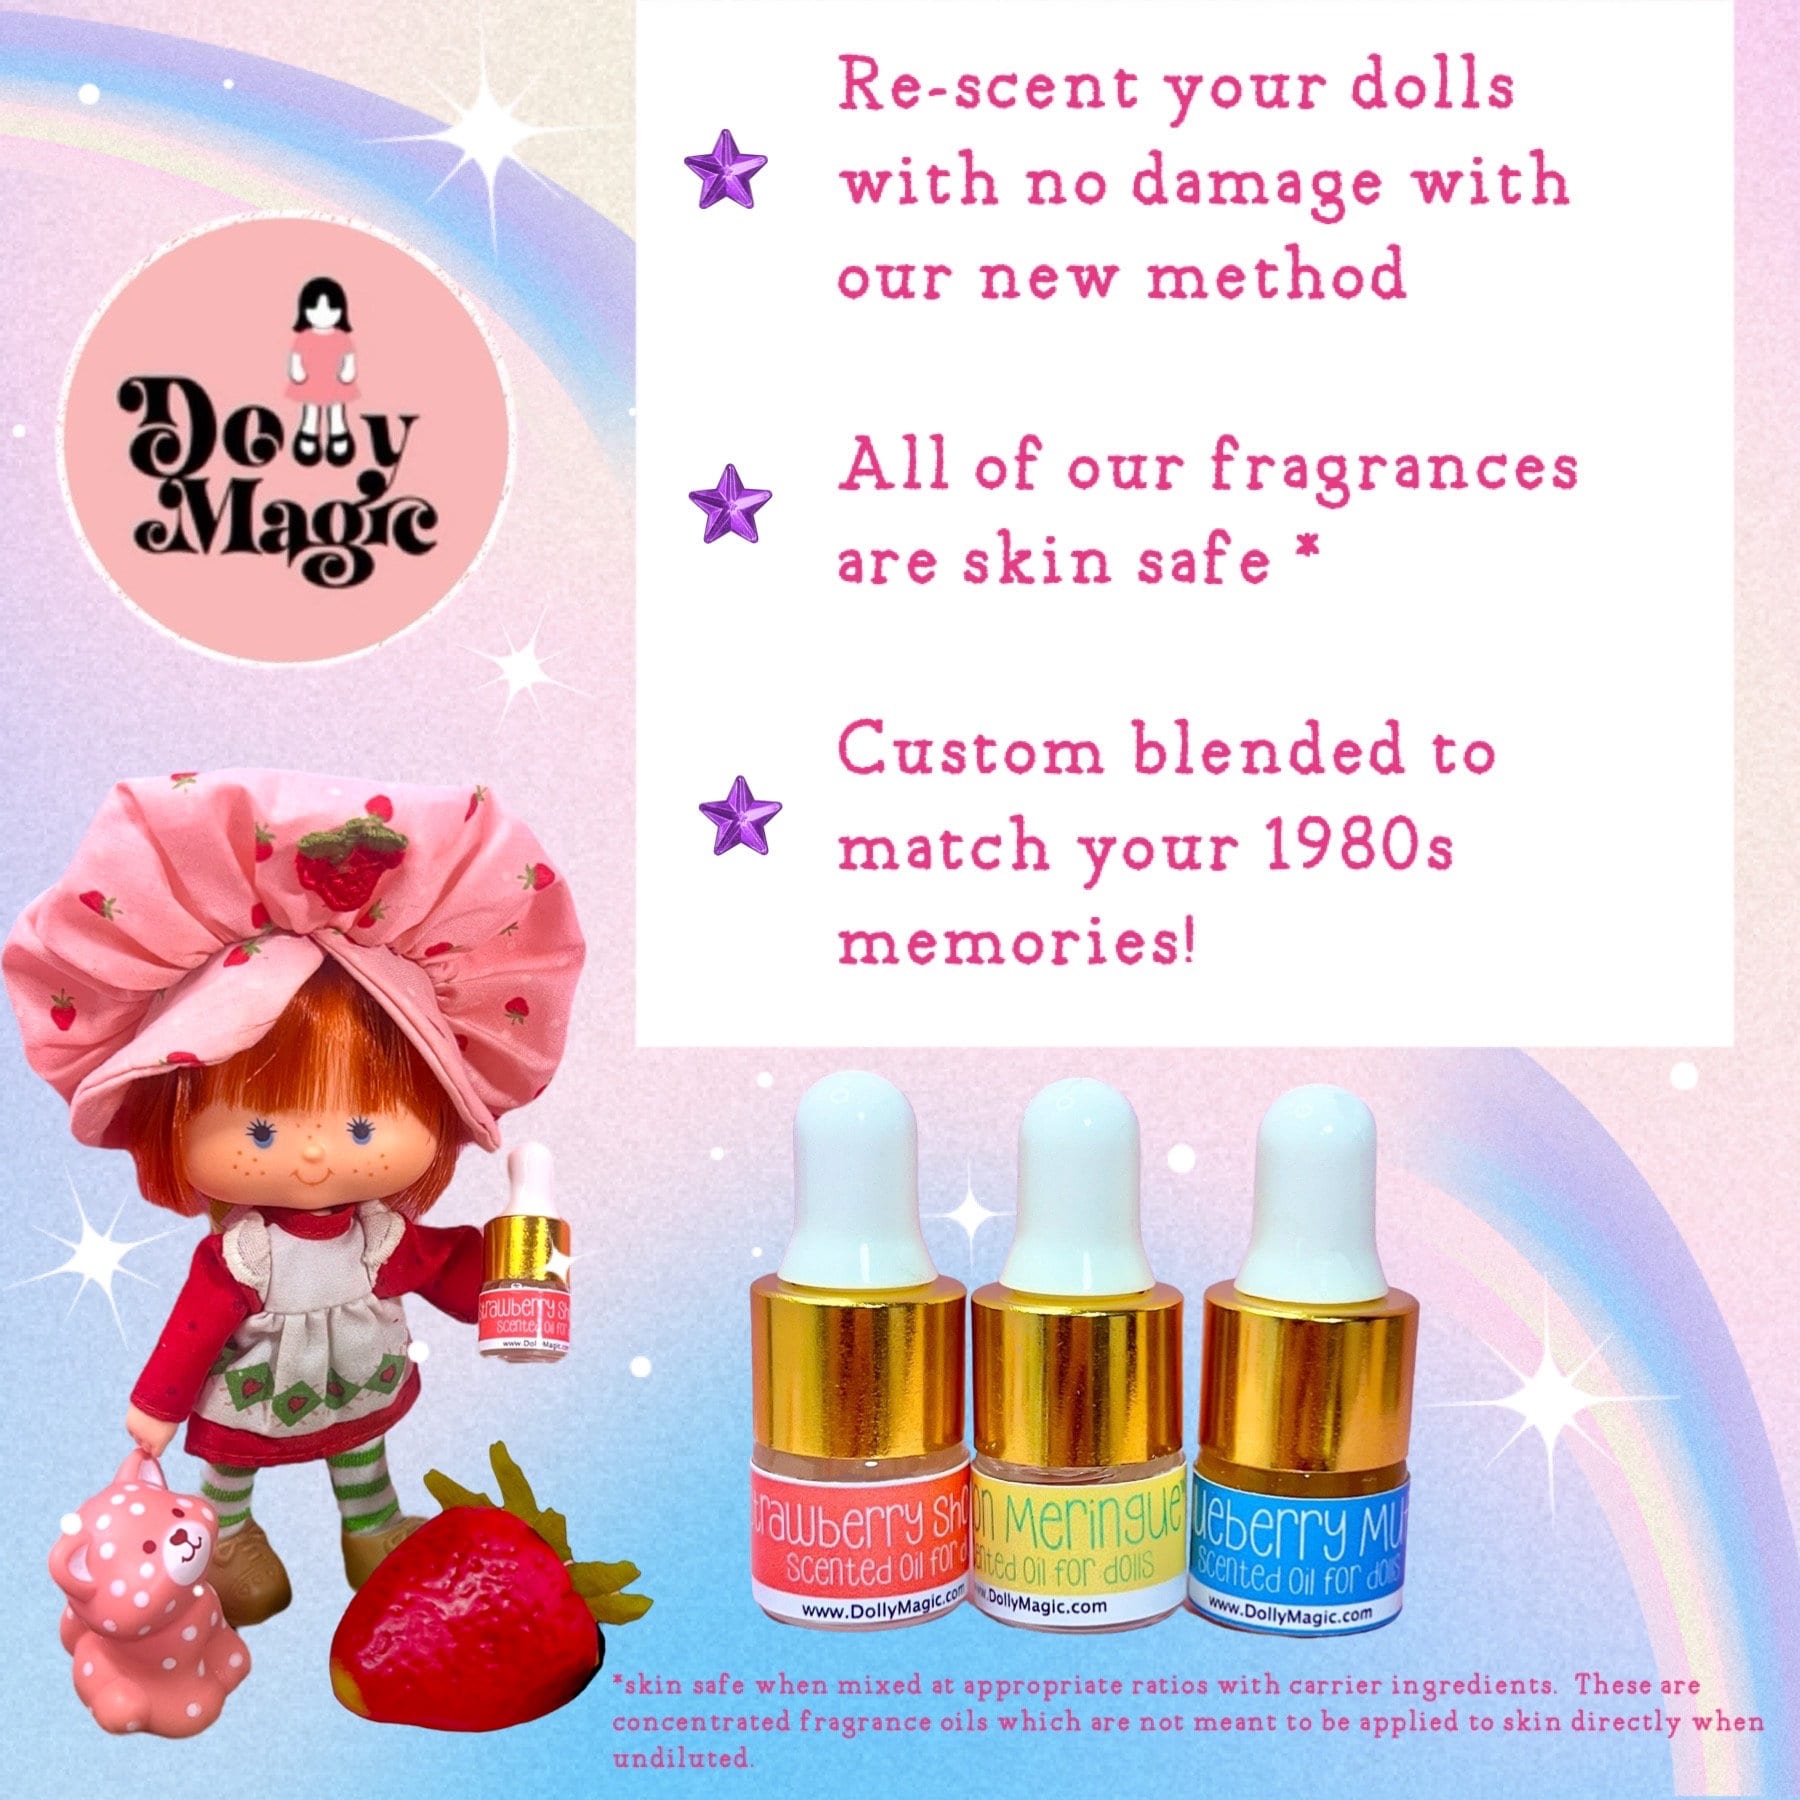 US ORDERS ONLY: DIY Scented Doll Kit - Scent Your Vintage Strawberry Shortcake Dolls!